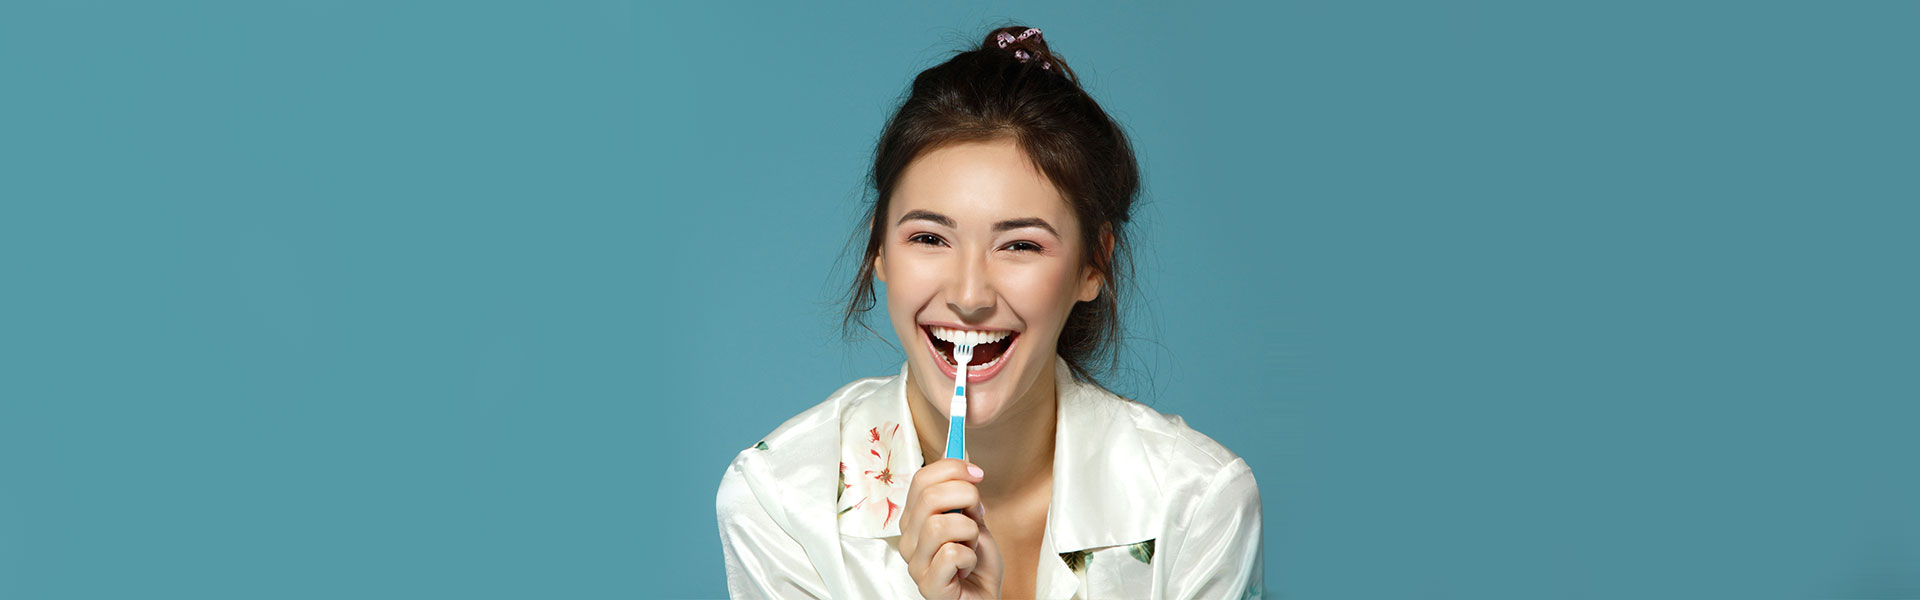 Smiling Lady Holding Tooth Brush in Hand